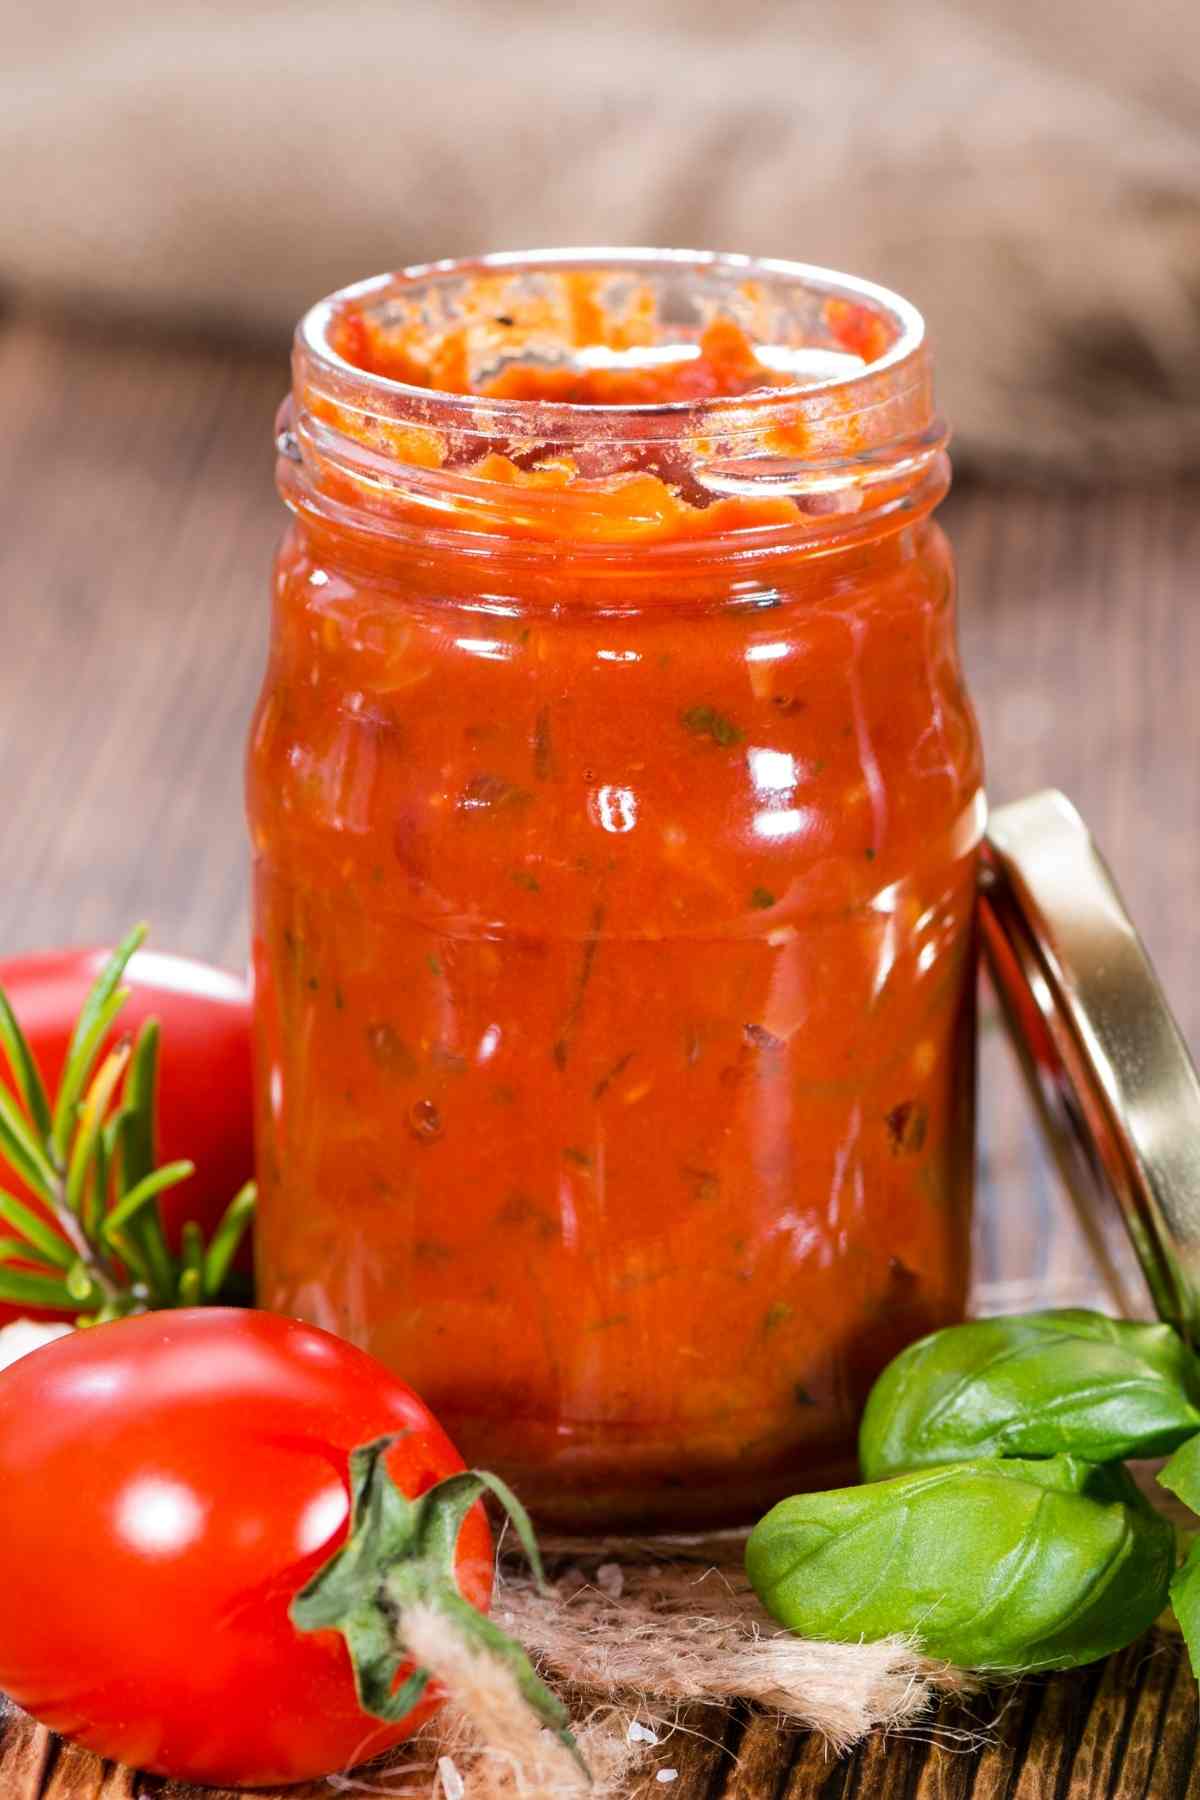 This Homemade Tomato Sauce is loaded with rich tomato flavor. It’s easy to make, and you’ll have fresh tomato sauce to transform into spaghetti sauce, tomato soup, or anything you want!